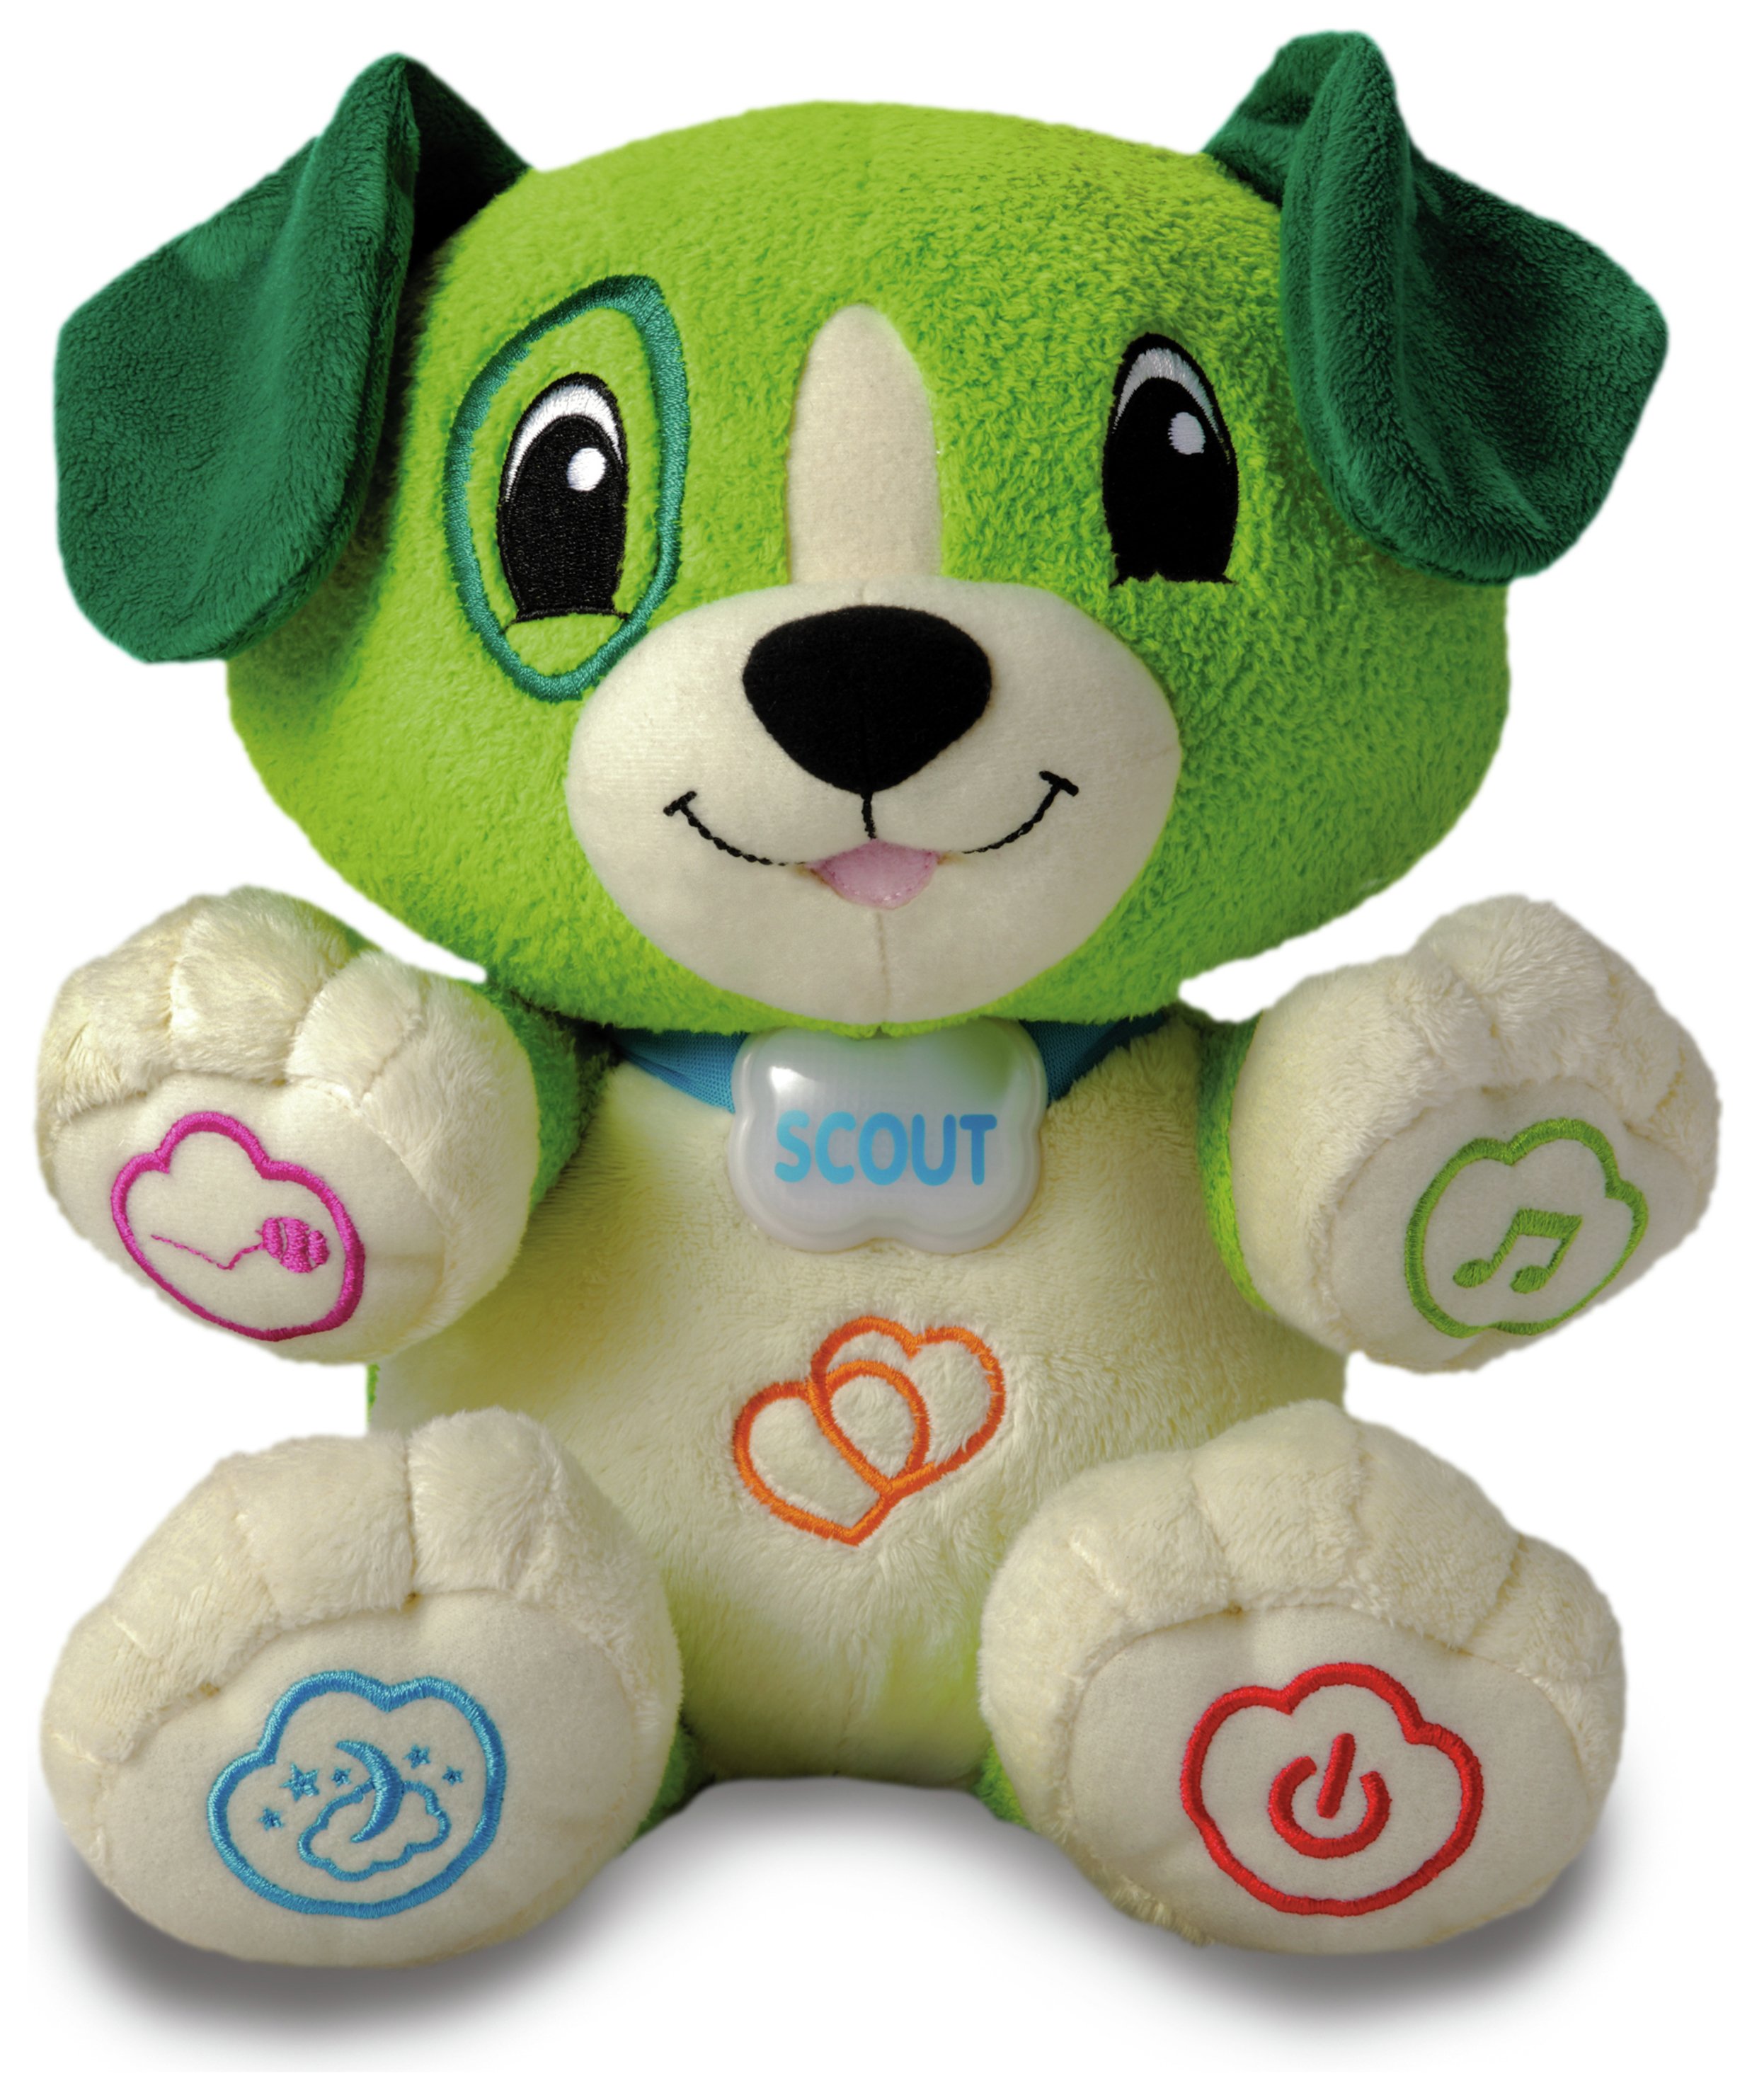 LeapFrog My Pal Scout Puppy - Green